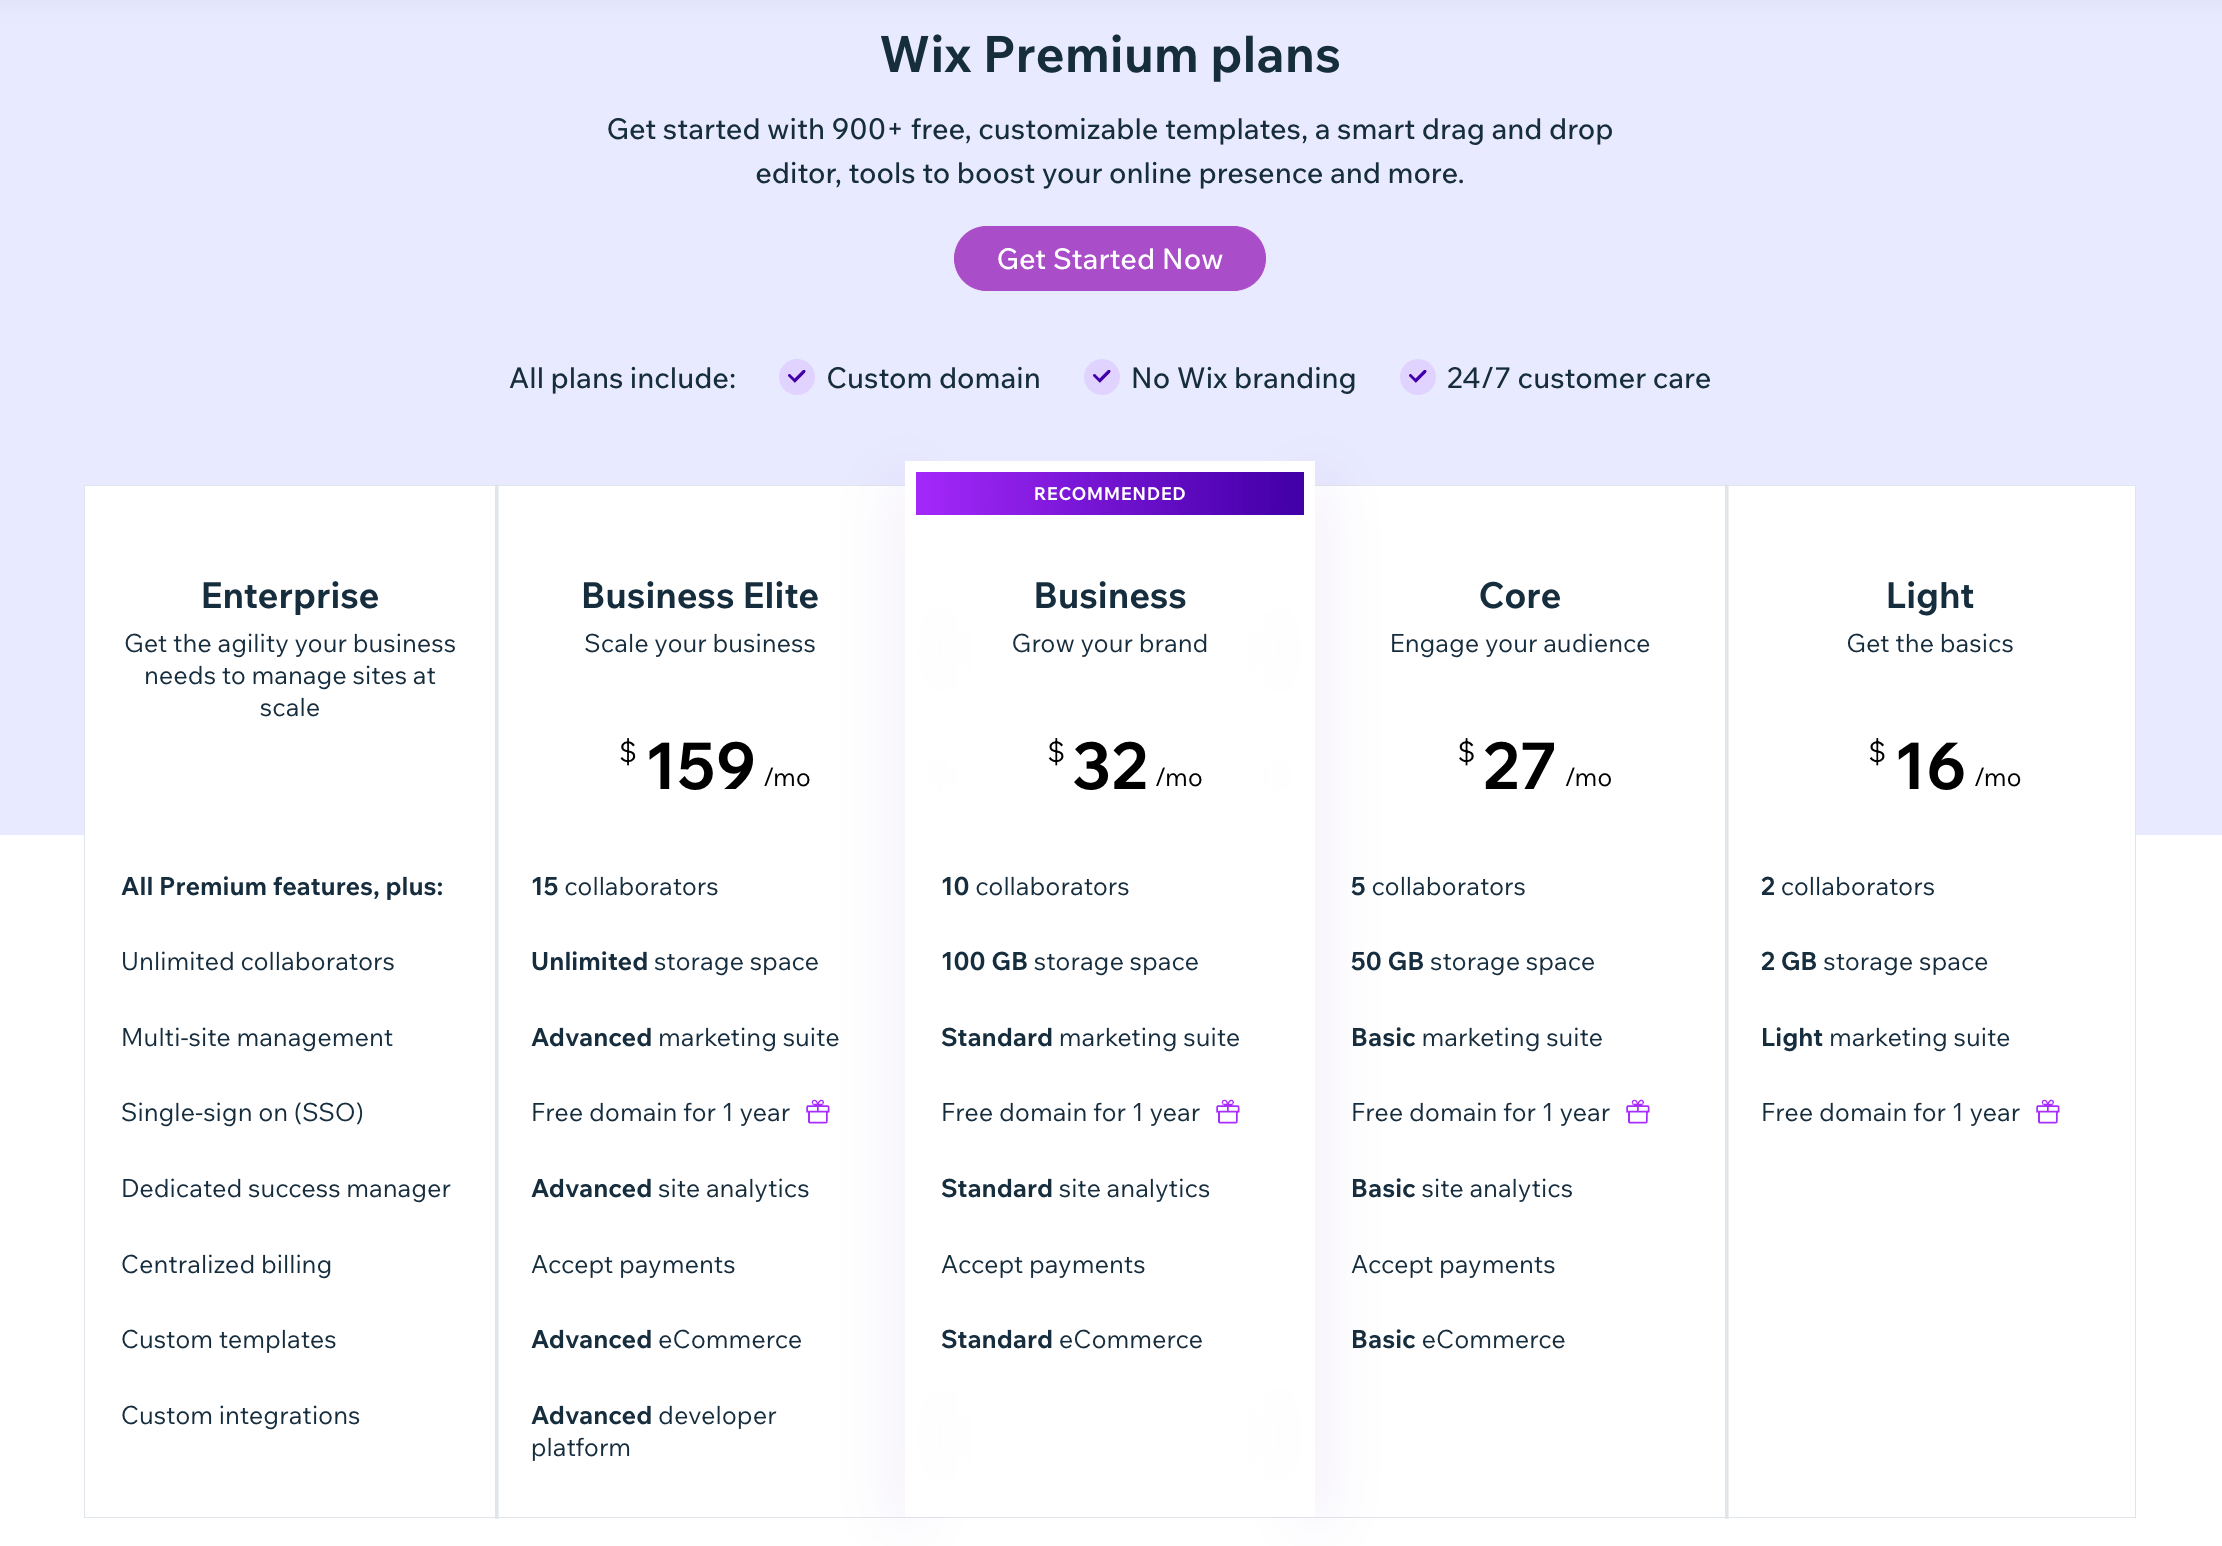 Wix's pricing information